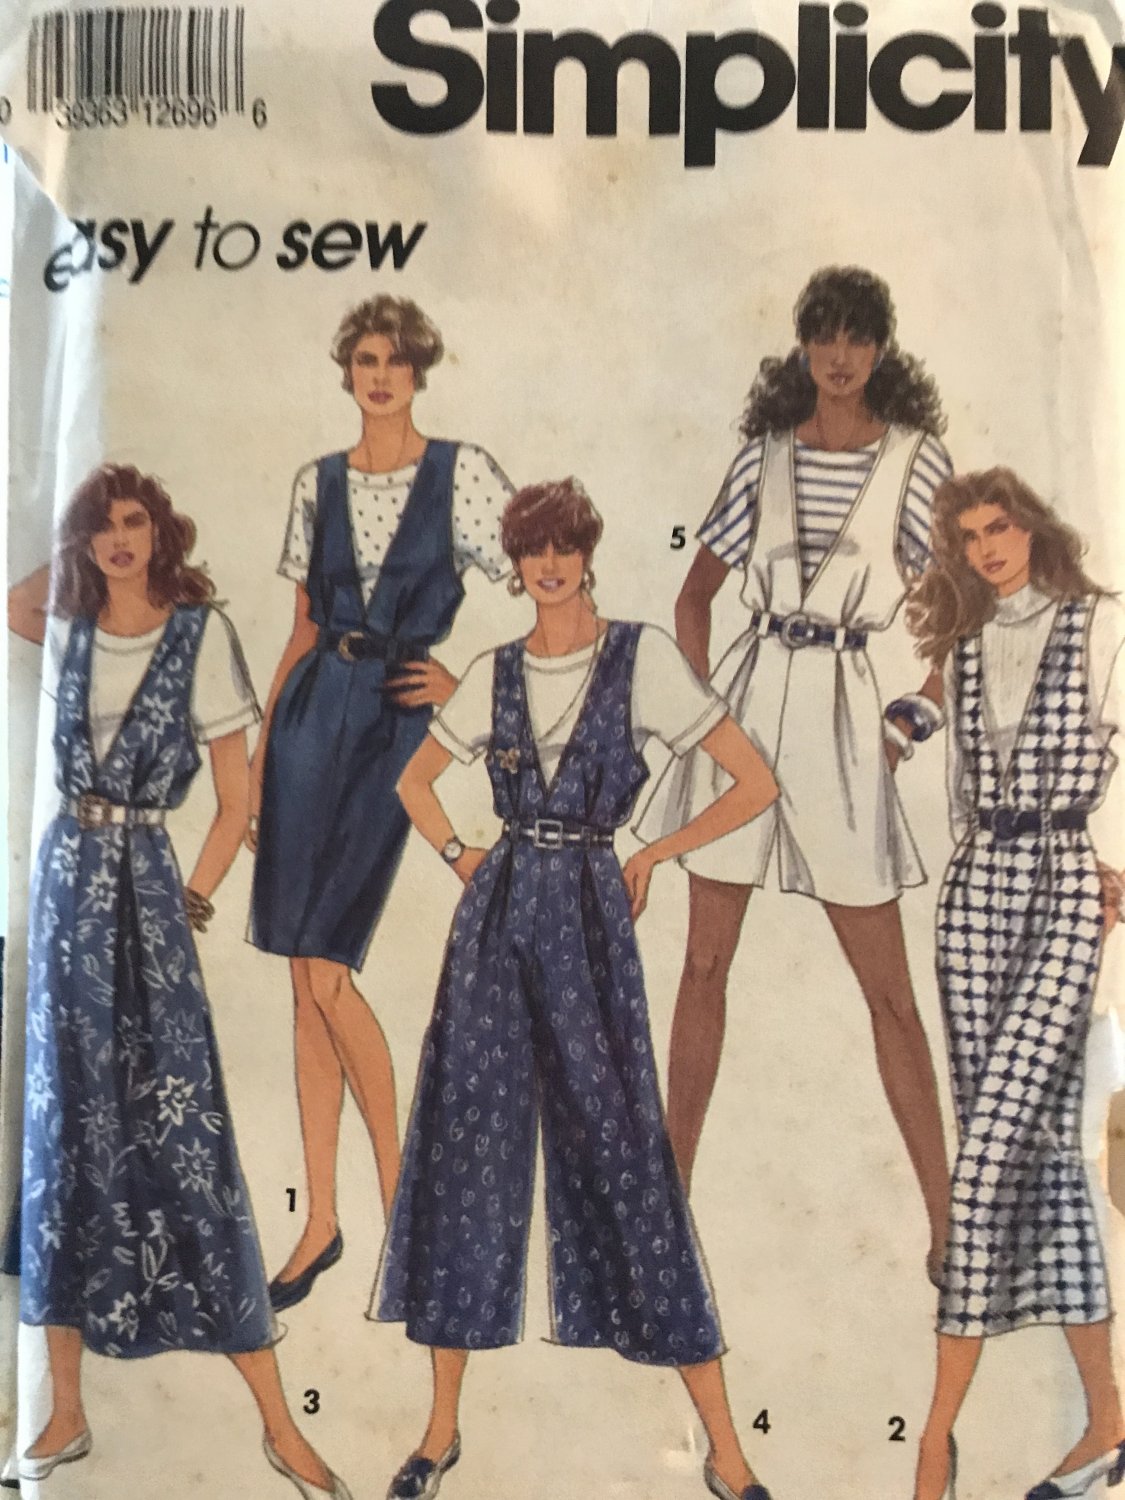 Simplicity Pattern 7877 Misses'/Miss Petite Jumpers & Top Sewing pattern size LG - XL